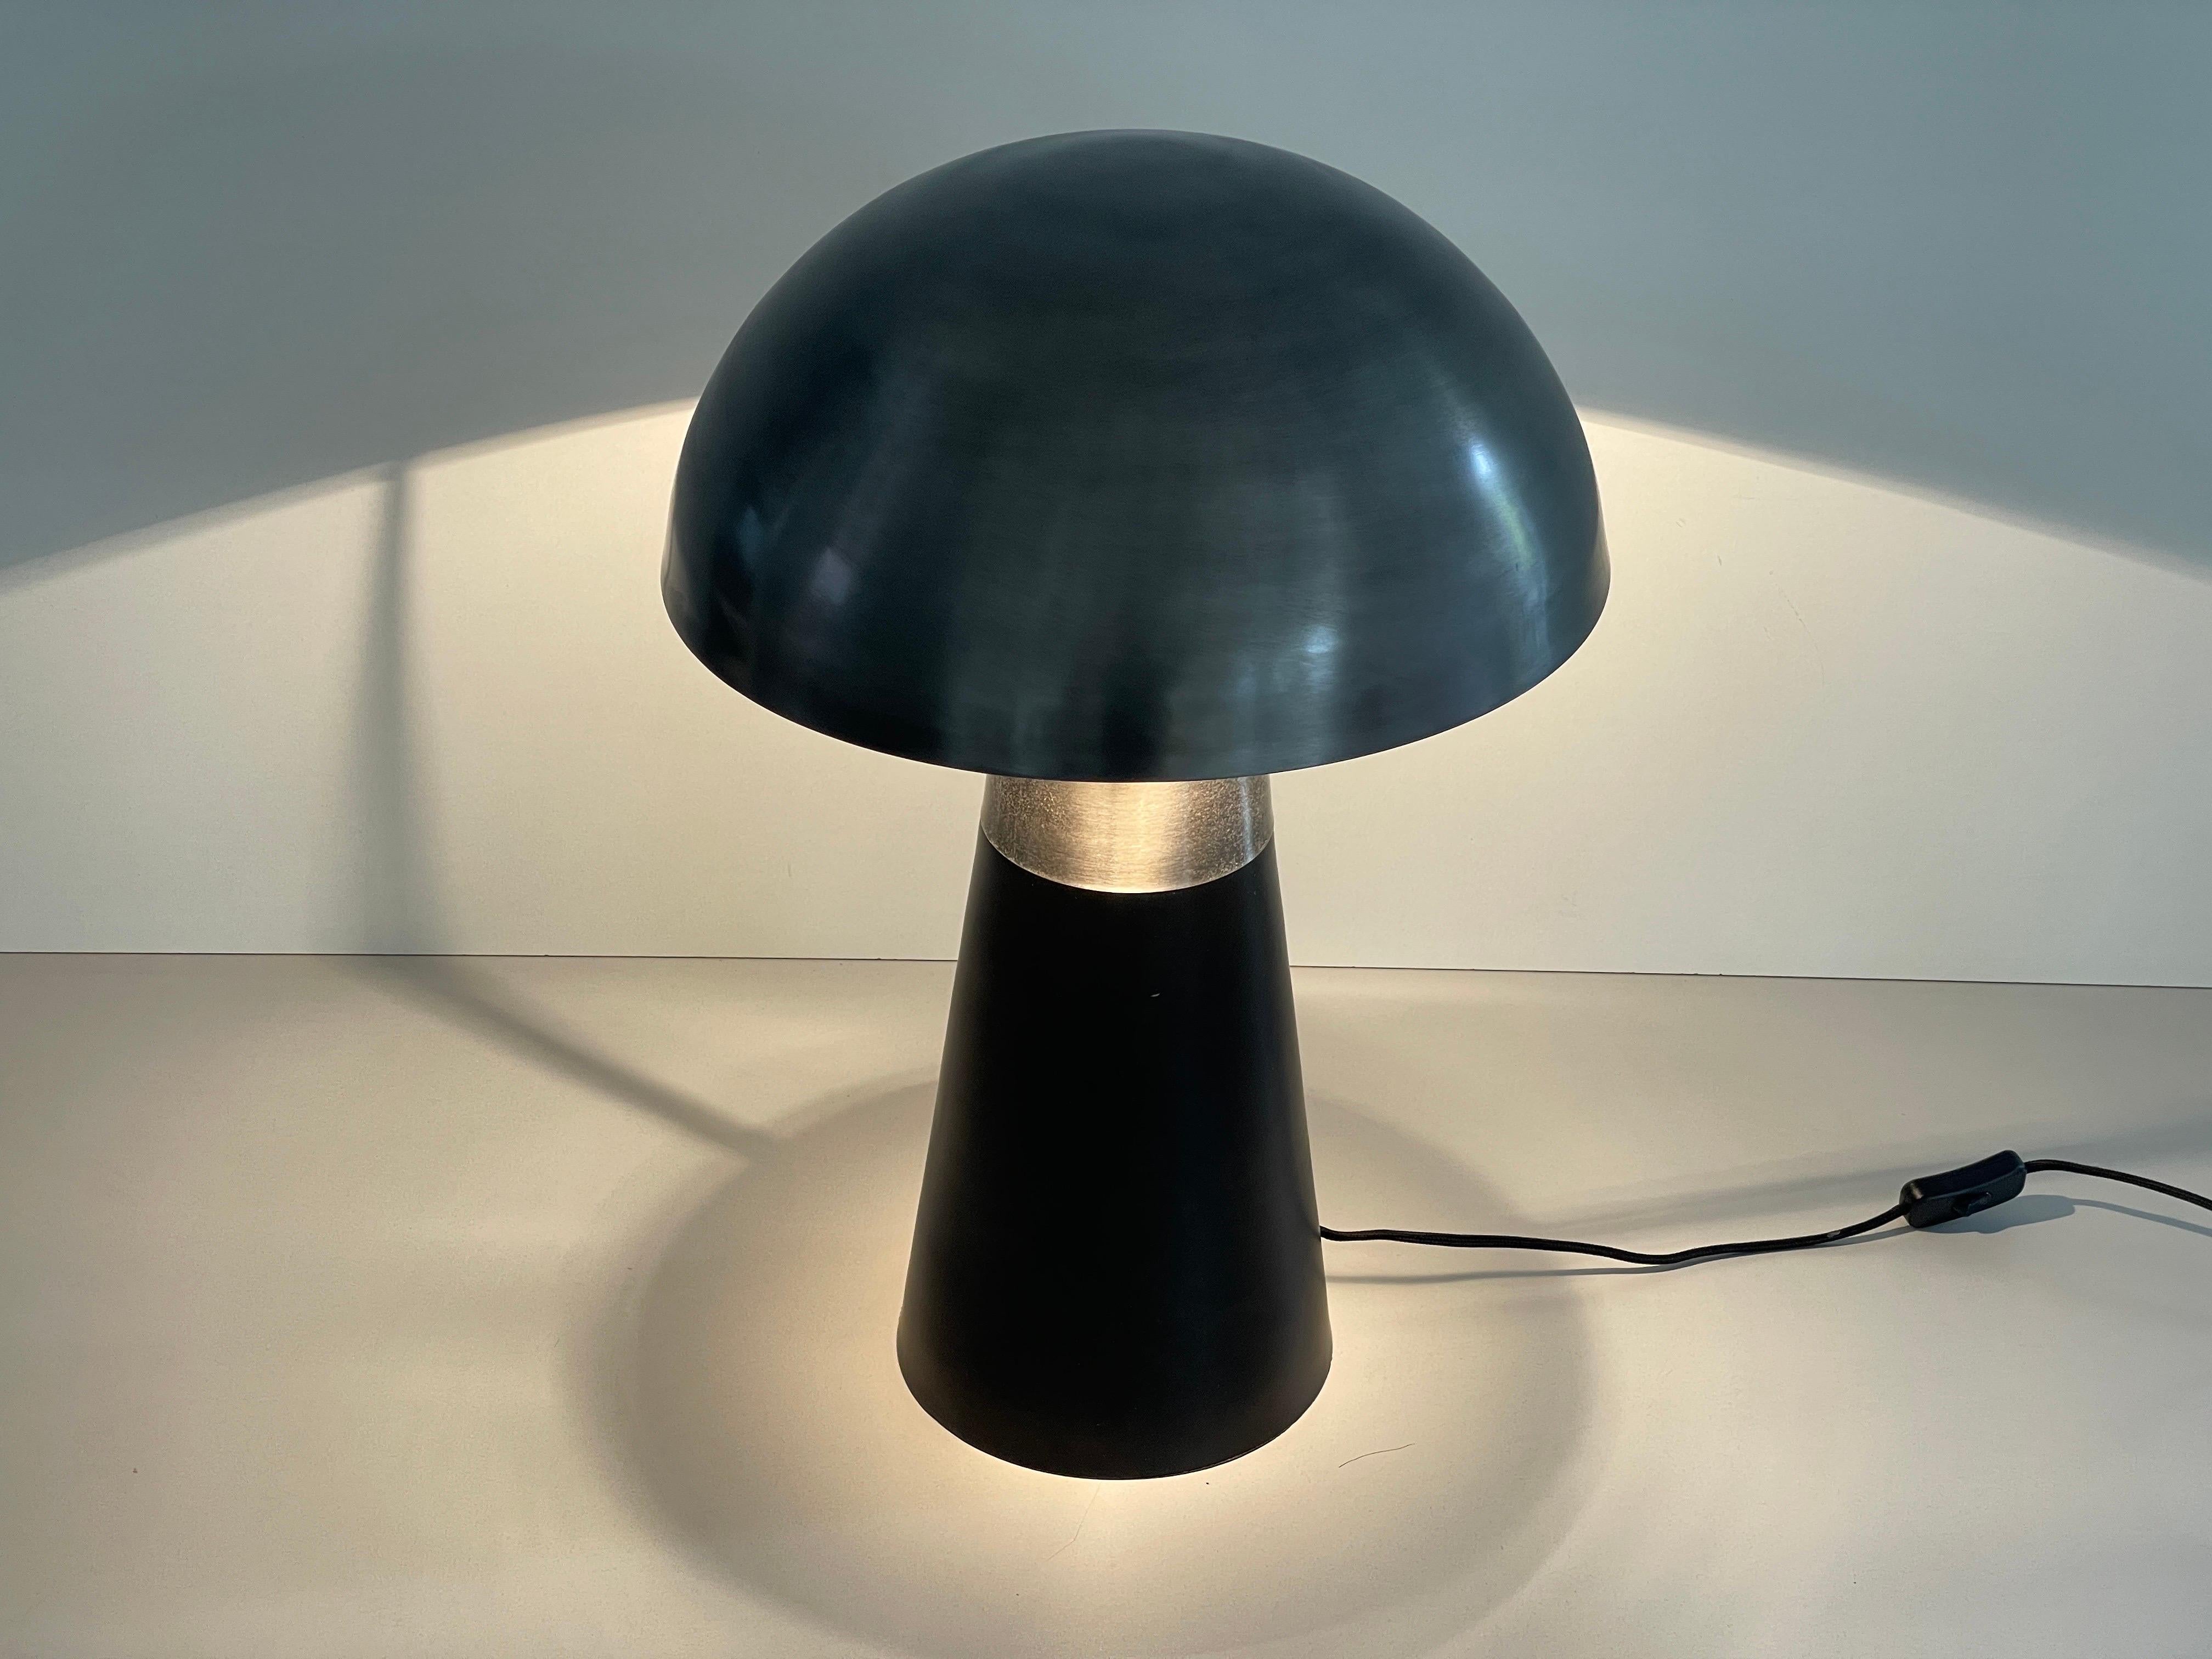 Muschroom and Conic Design Large Table Lamp by LAMBERT, 1980s, Germany For Sale 7